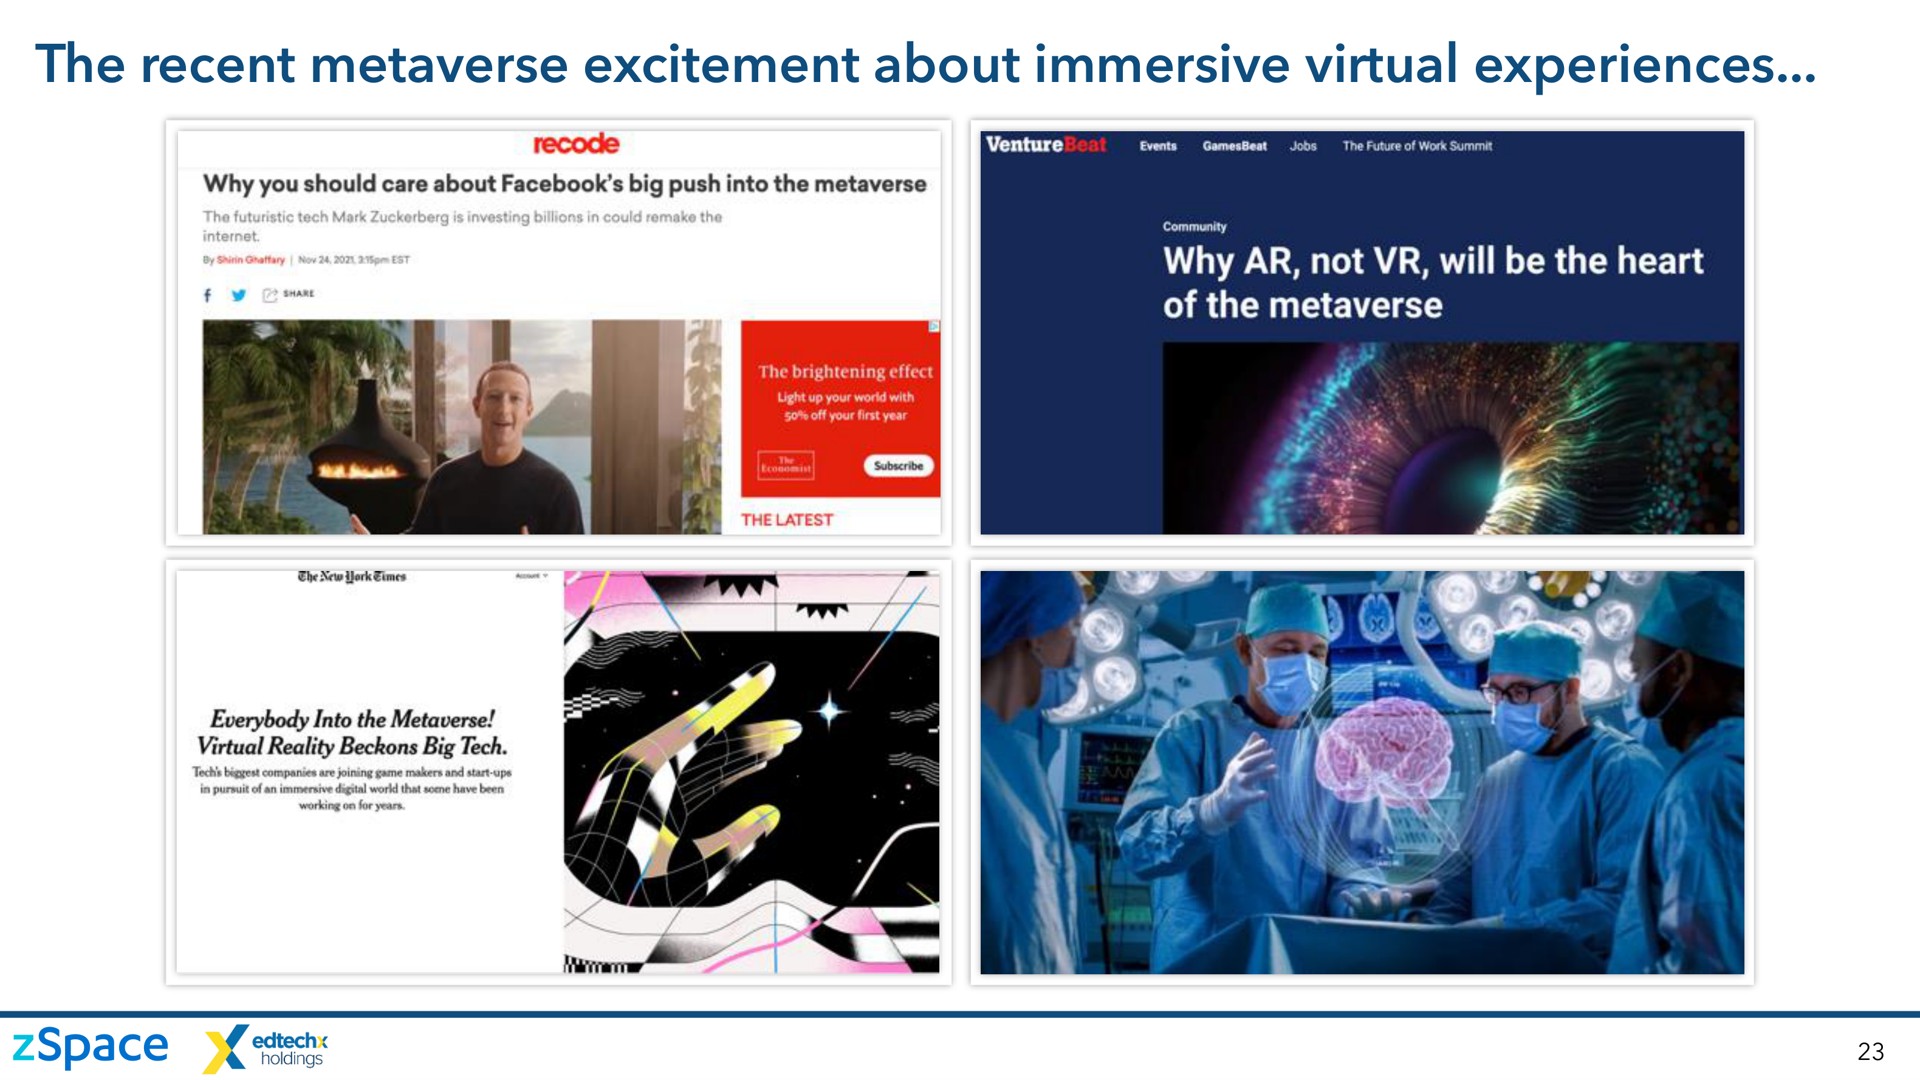 the recent excitement about immersive virtual experiences | zSpace